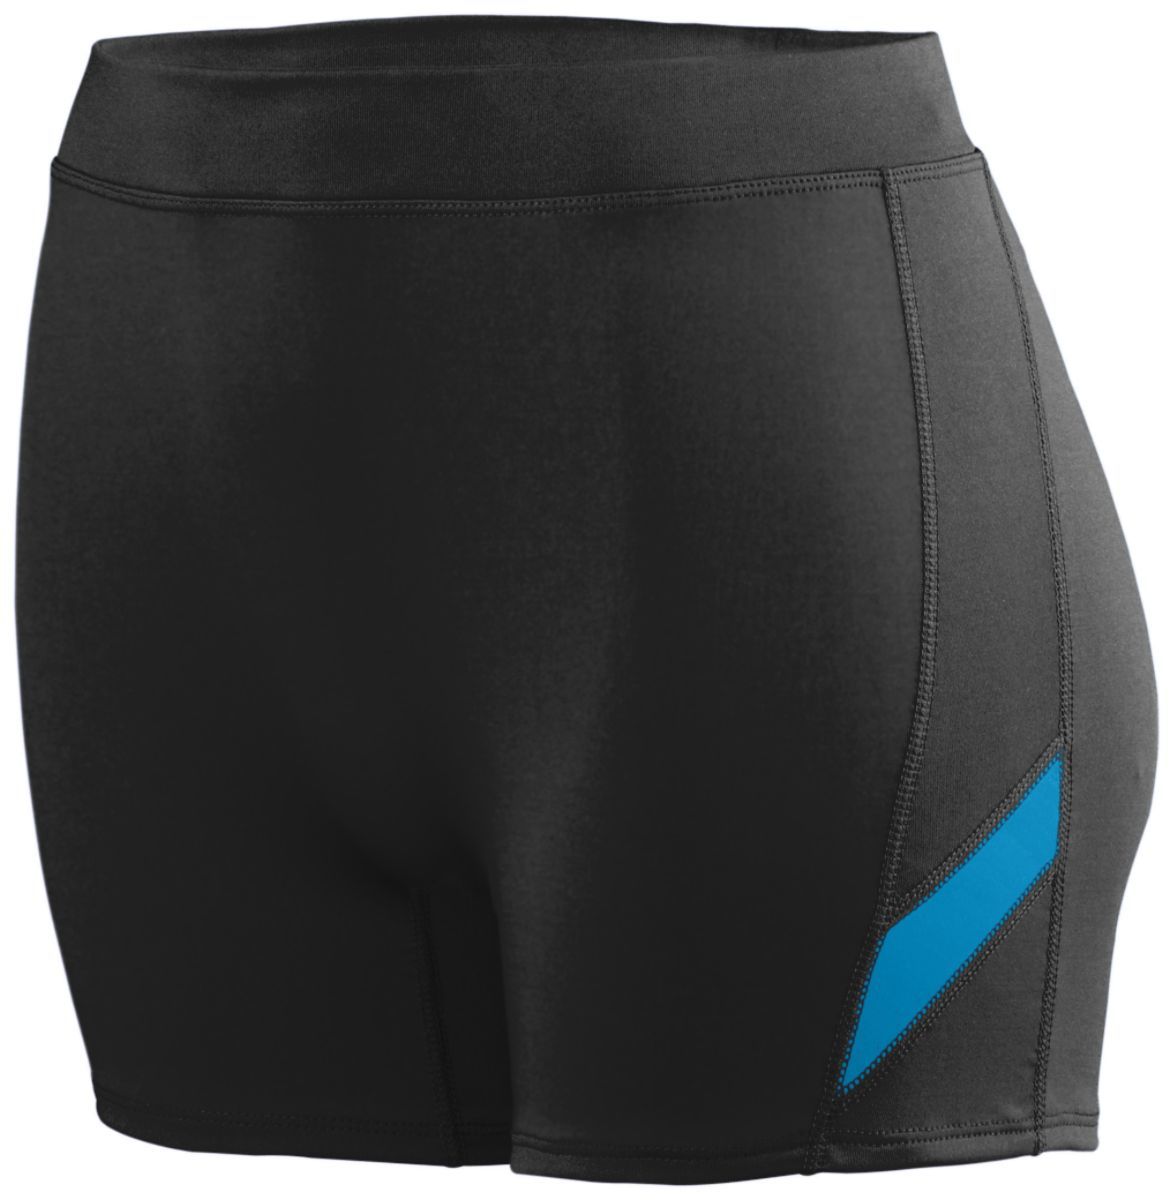 Augusta Sportswear Ladies Stride Shorts in Black/Power Blue  -Part of the Ladies, Ladies-Shorts, Augusta-Products, Volleyball product lines at KanaleyCreations.com